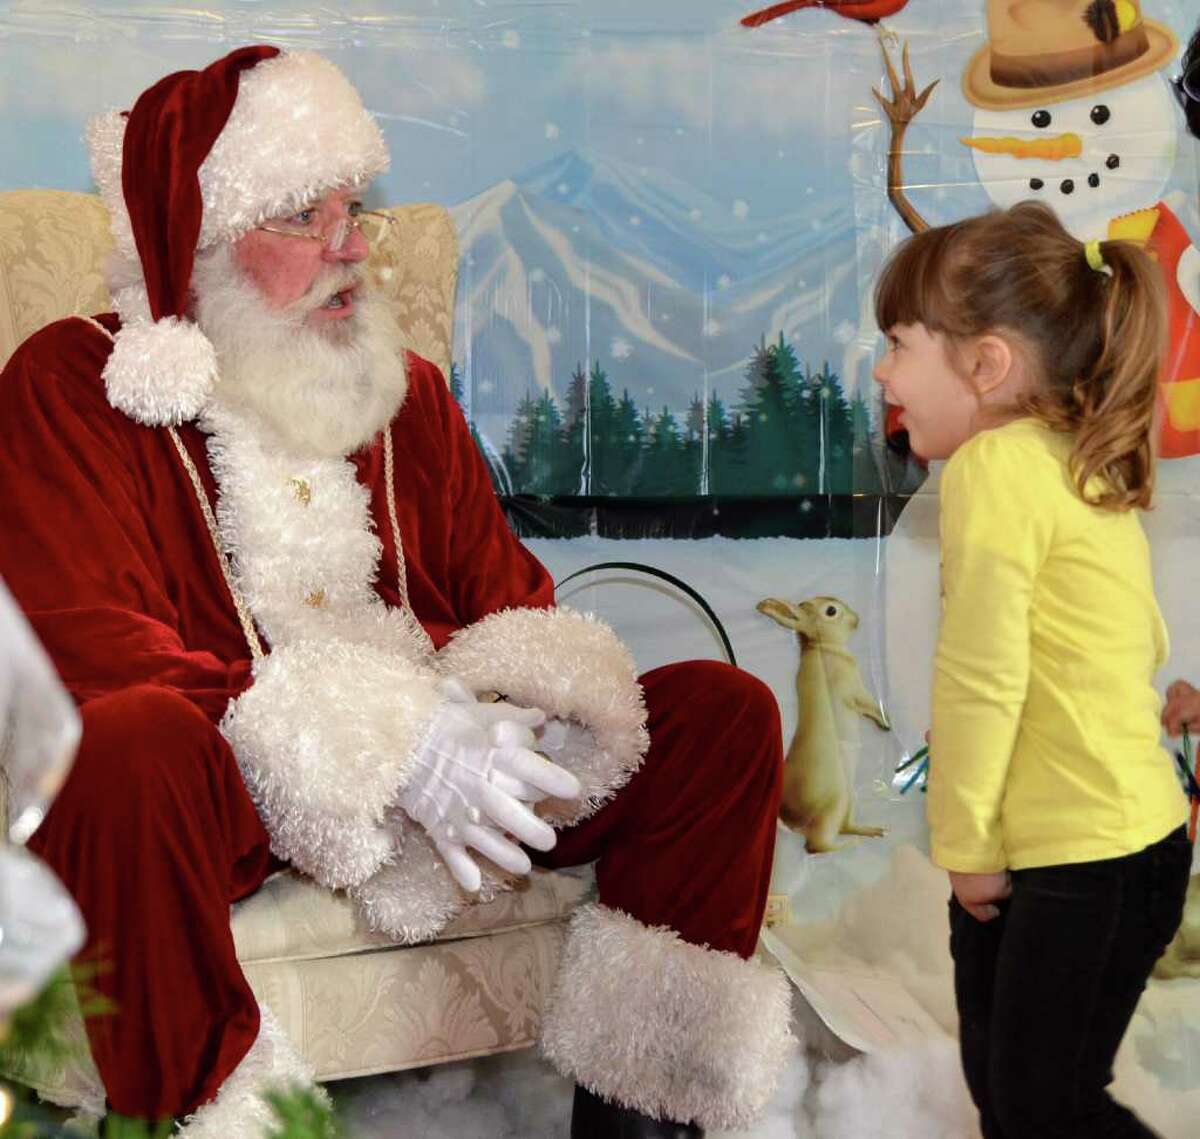 Three-year-old Lisa Mallozzi is simply and totally excited at her chance to talk to Santa at the Nature Center's Winter Wonderland.